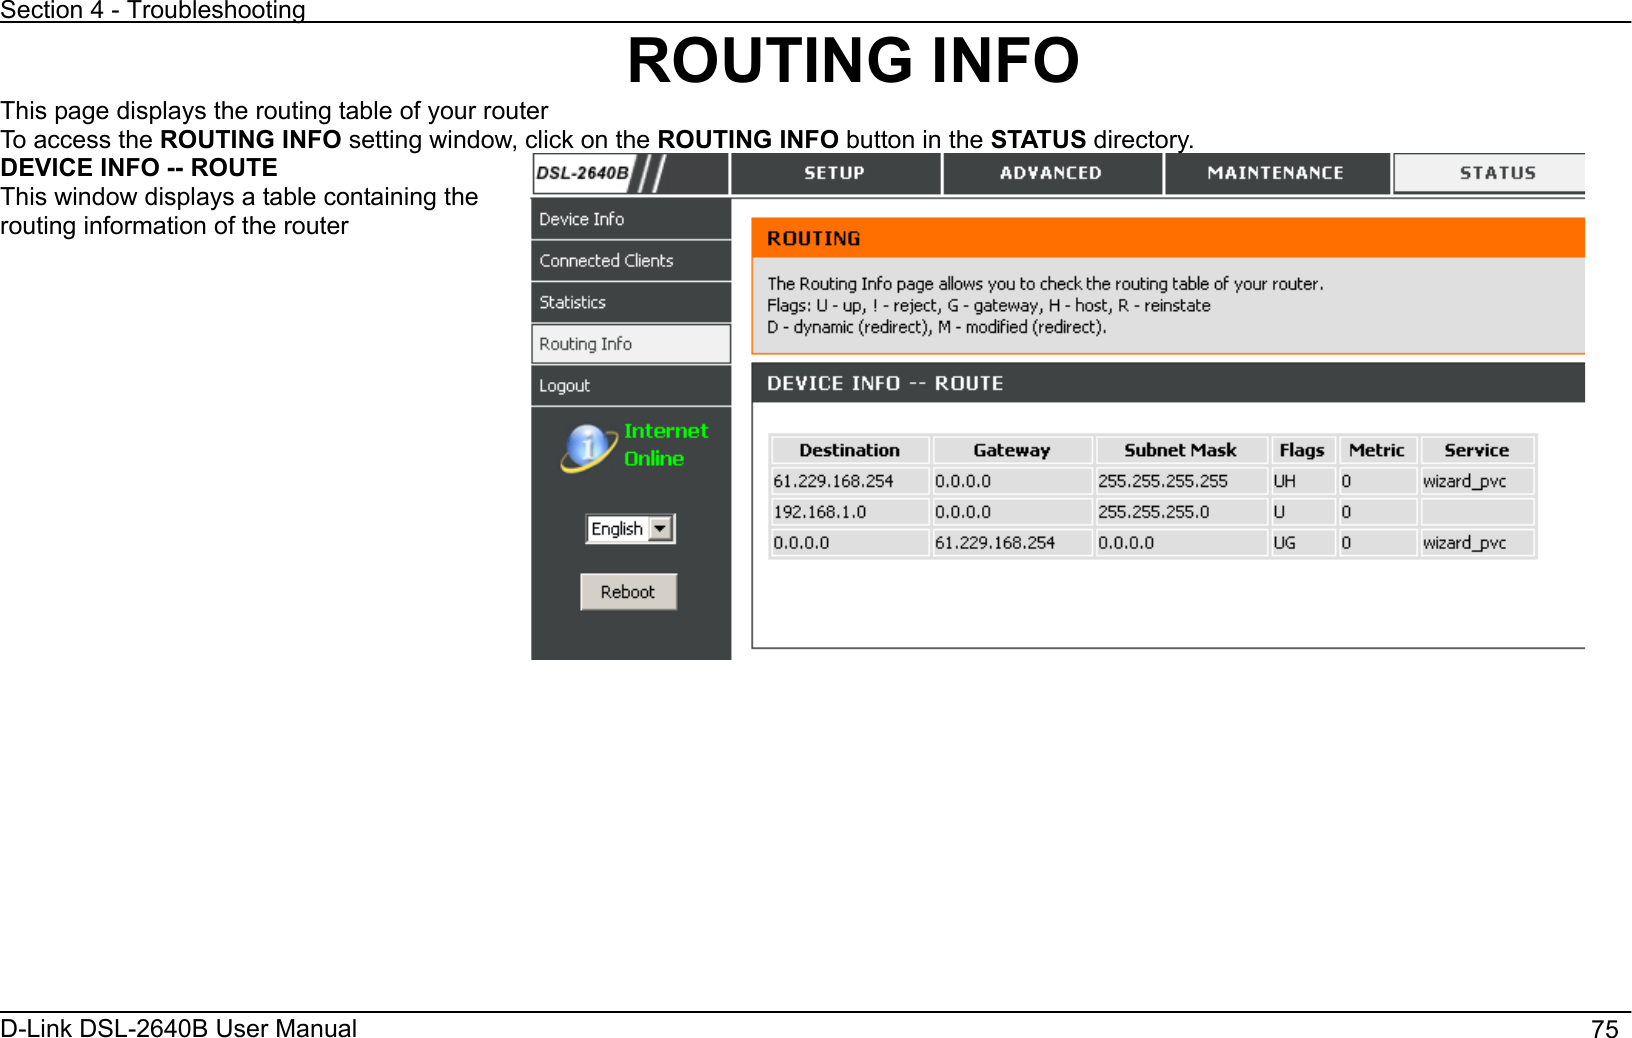 Section 4 - Troubleshooting D-Link DSL-2640B User Manual                                       75ROUTING INFO This page displays the routing table of your router To access the ROUTING INFO setting window, click on the ROUTING INFO button in the STATUS directory. DEVICE INFO -- ROUTEThis window displays a table containing the routing information of the router 